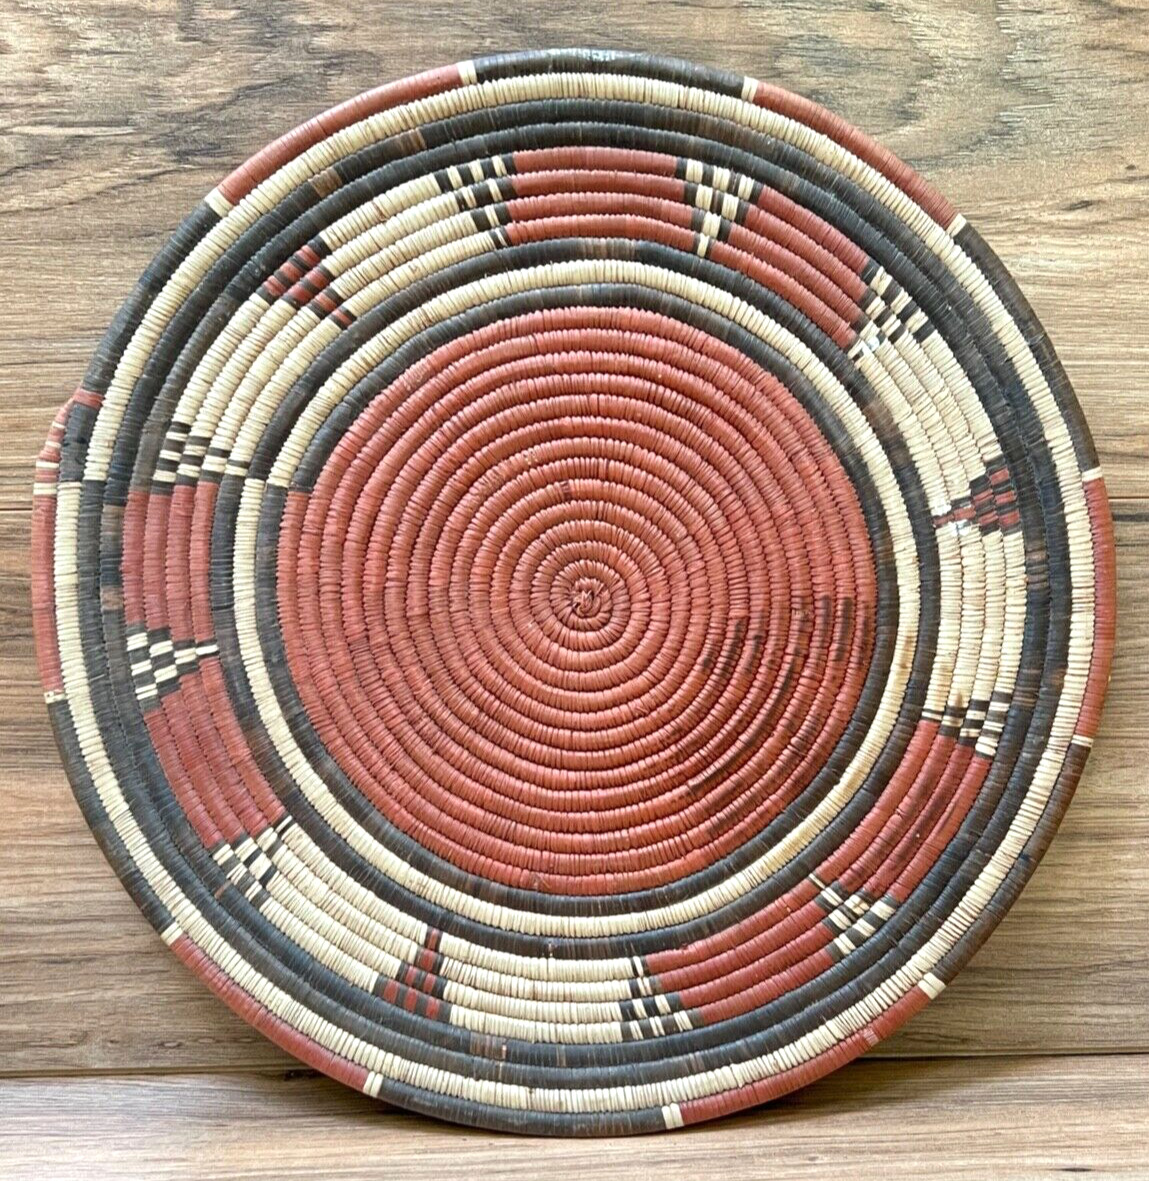 African Flat Basket Traditional Fulani Woven Coiled Decorative Wall Hanging VTG